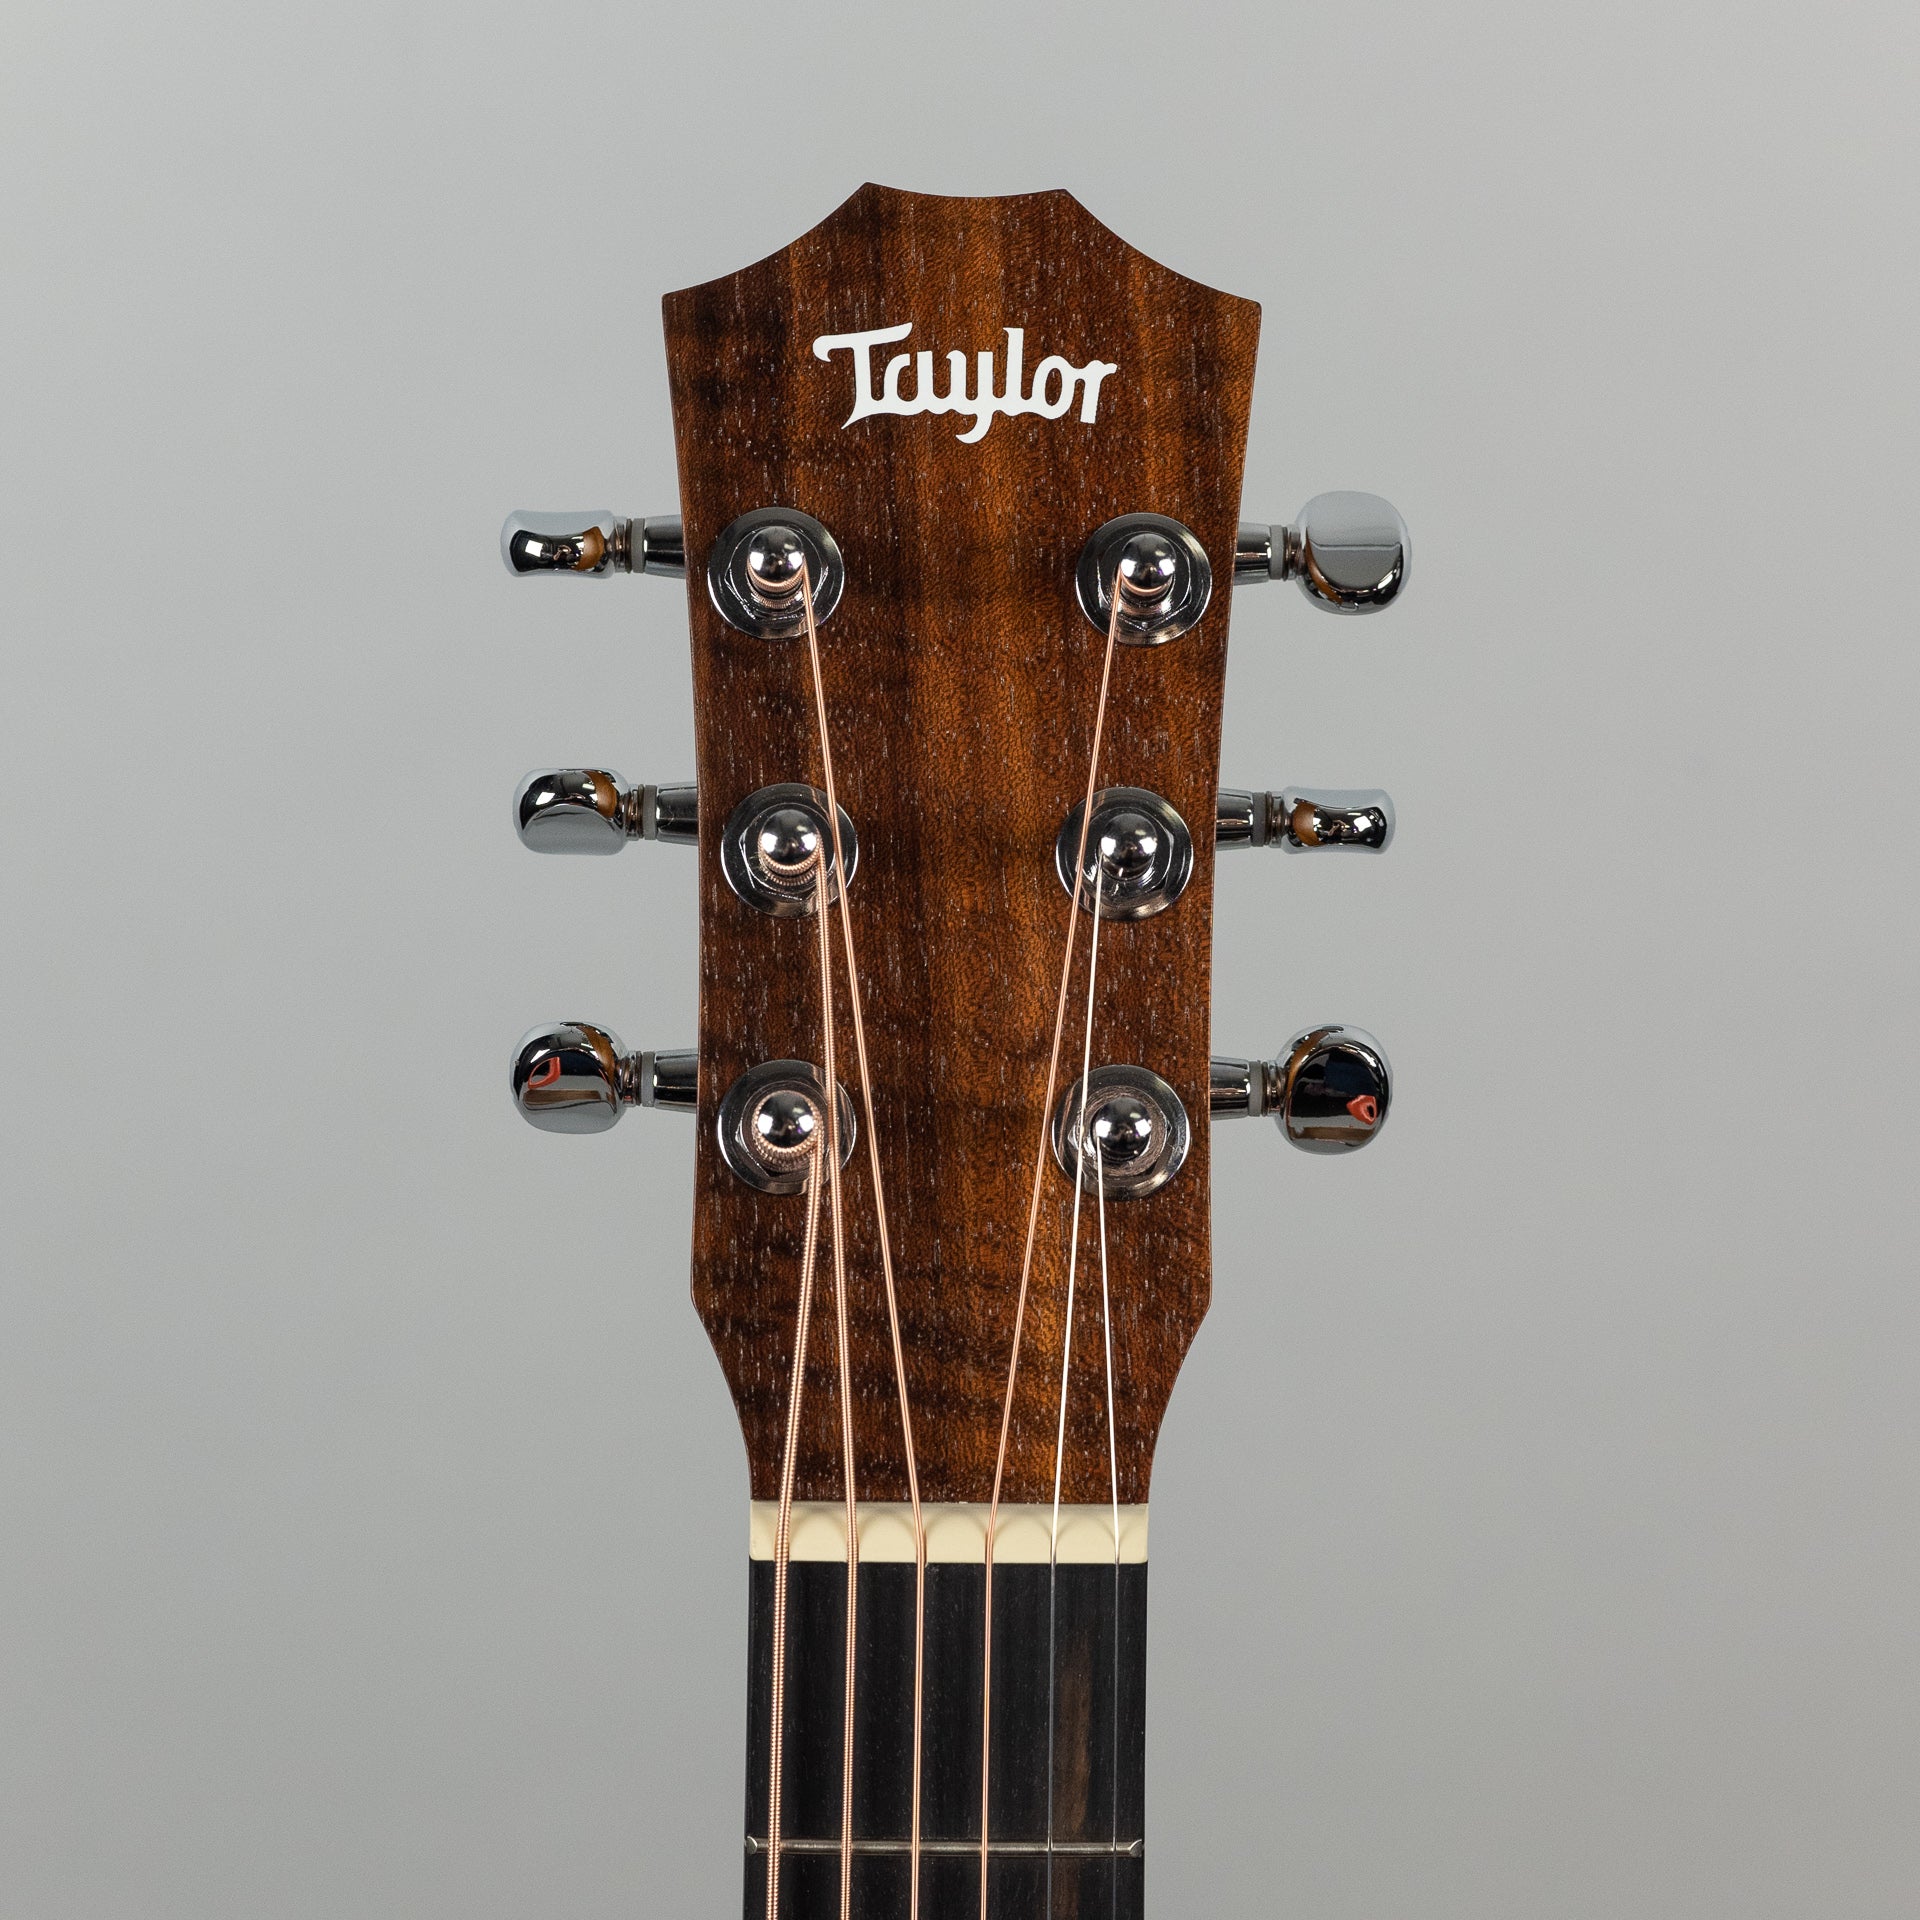 BT-1 BABY TAYLOR 3/4 SIZE ACOUSTIC GUITAR